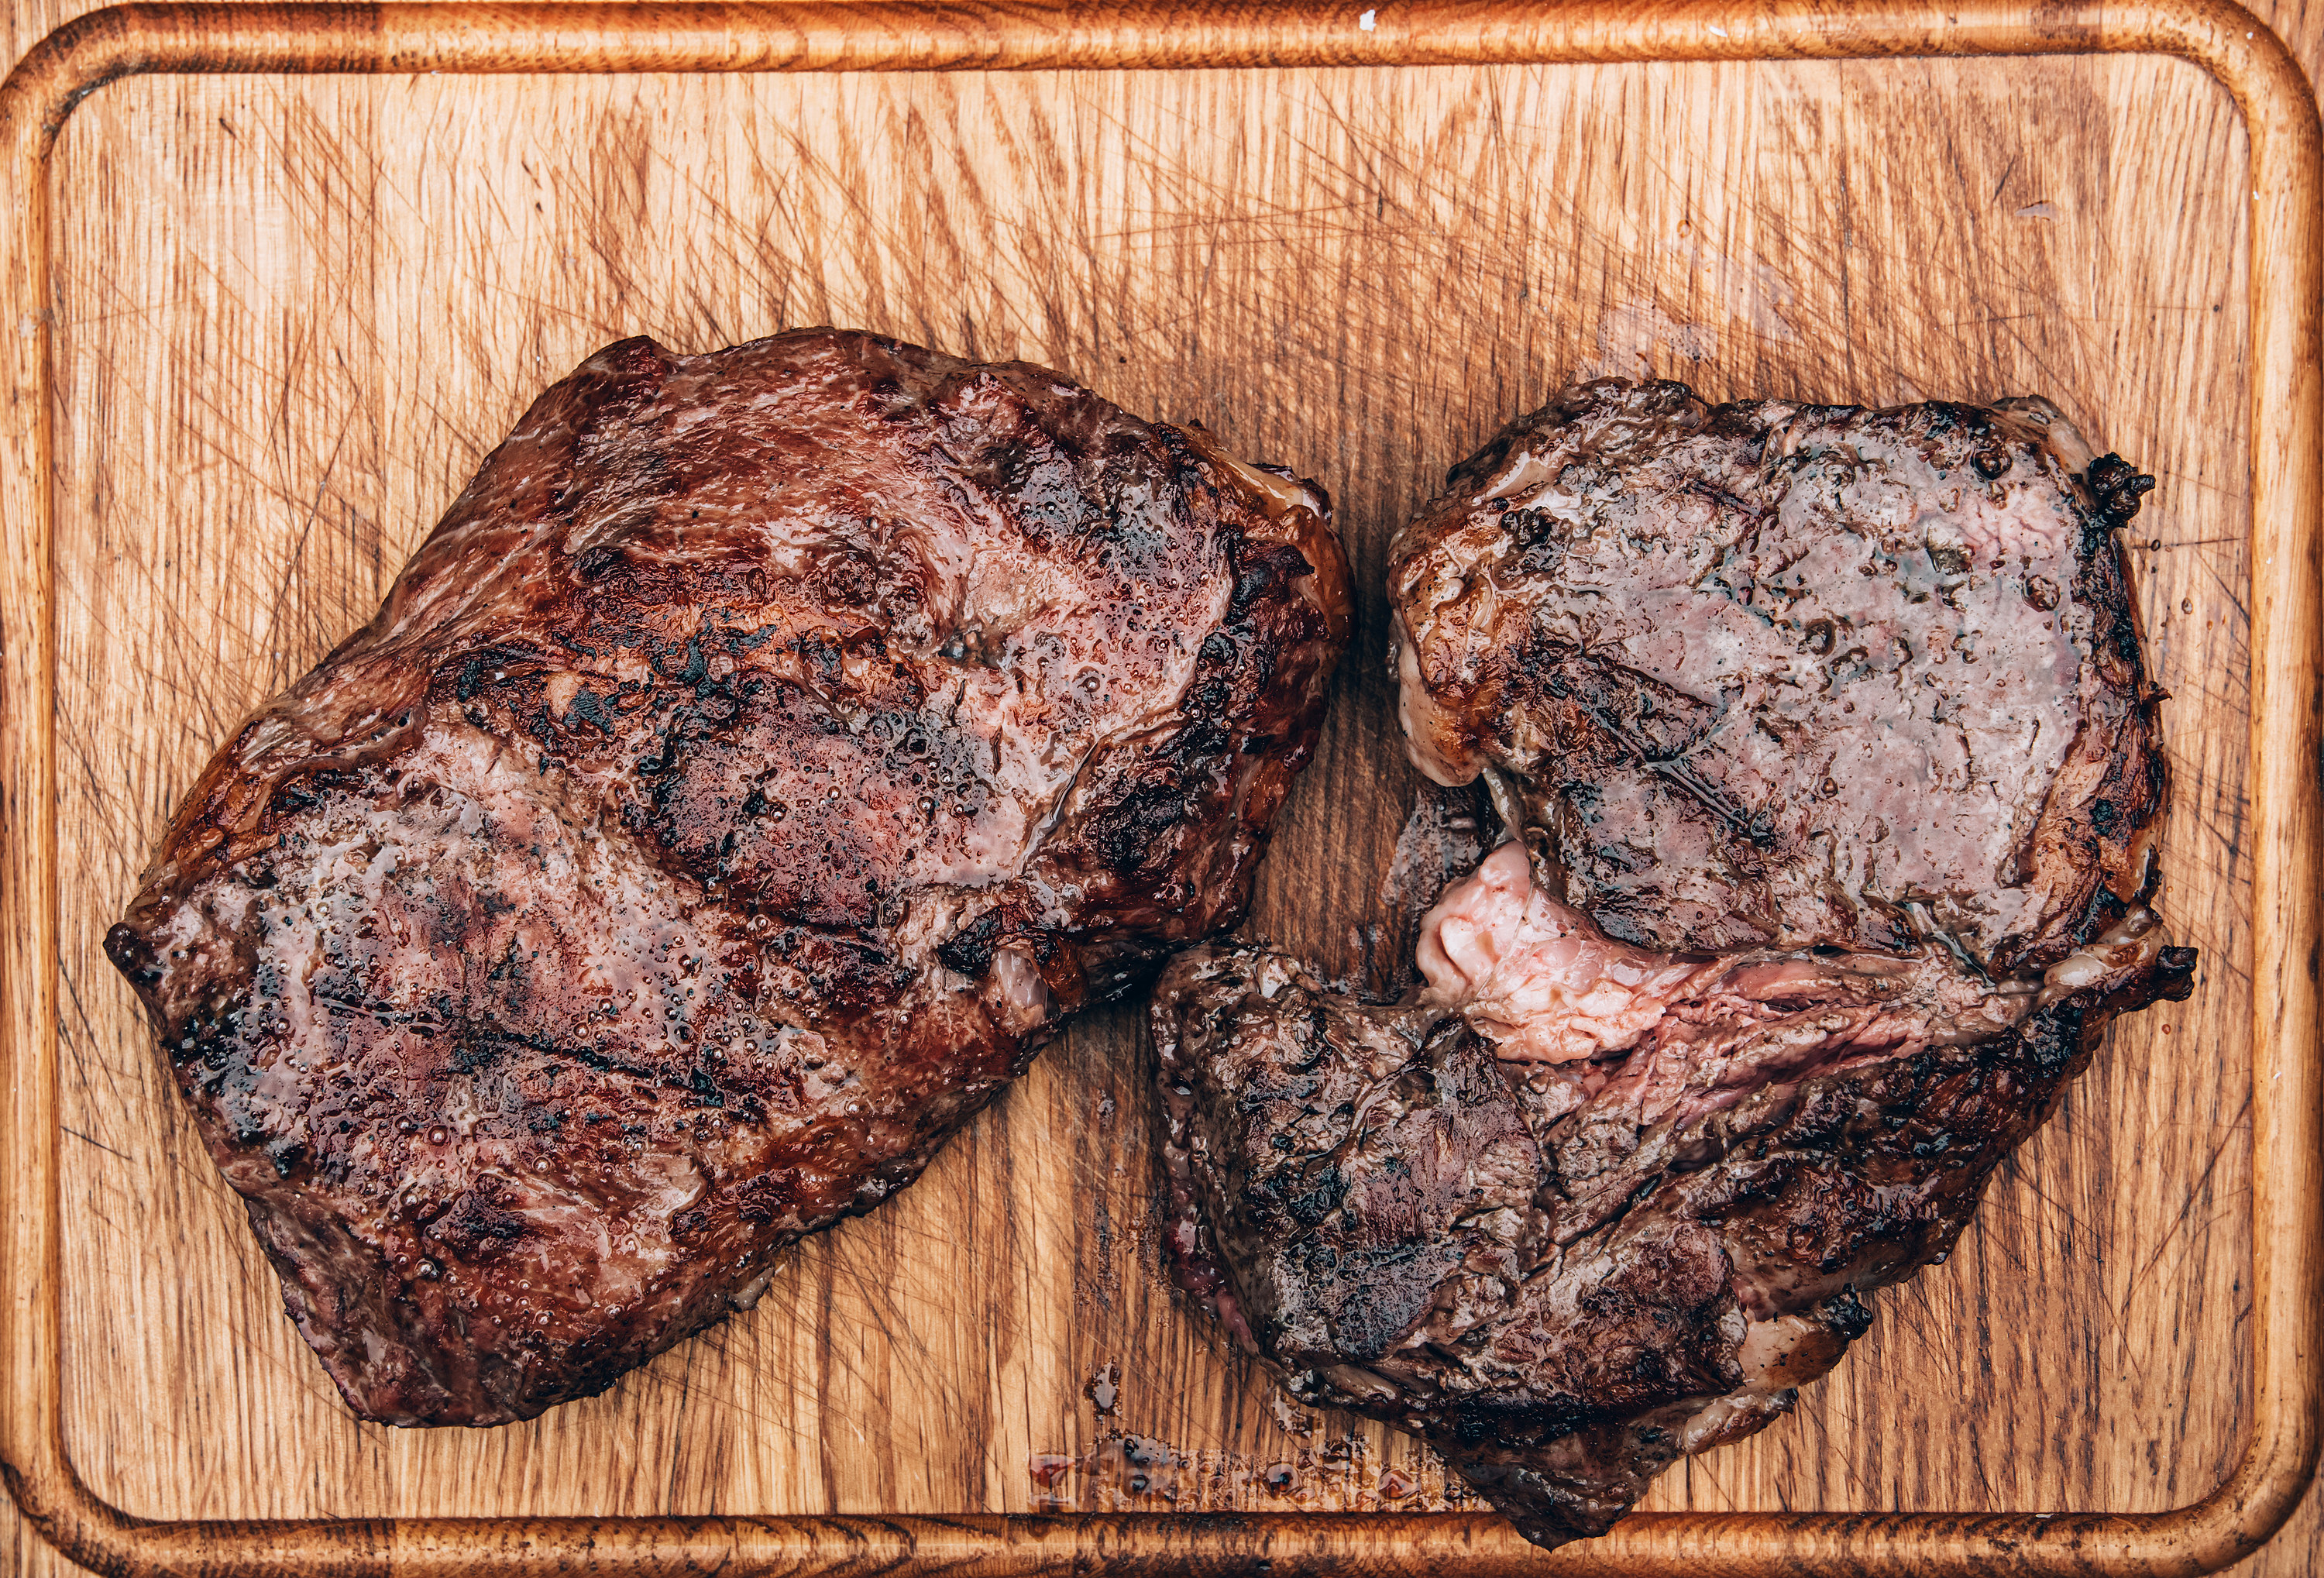 Top view of two grilled beef meat steaks on wooden cutting board